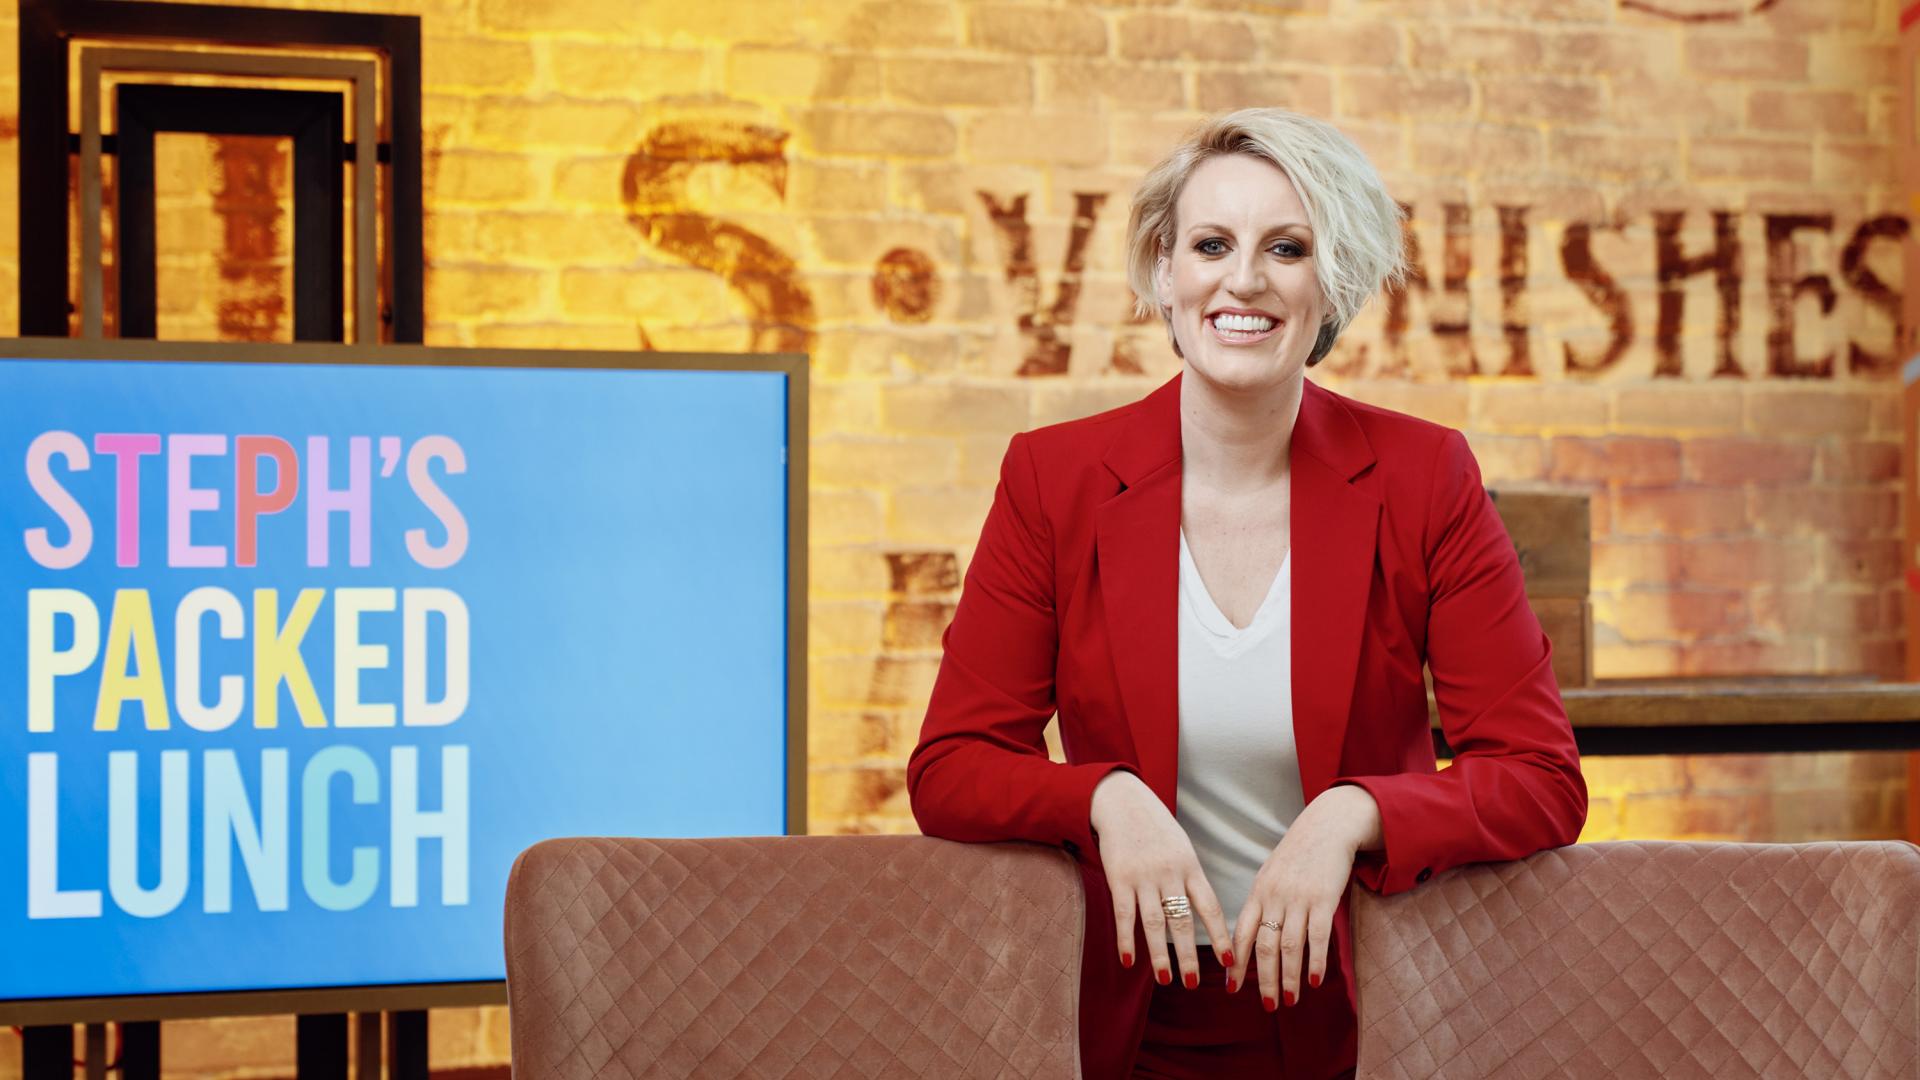 Promotional image of presenter Steph McGovern from Steph's Packed Lunch 